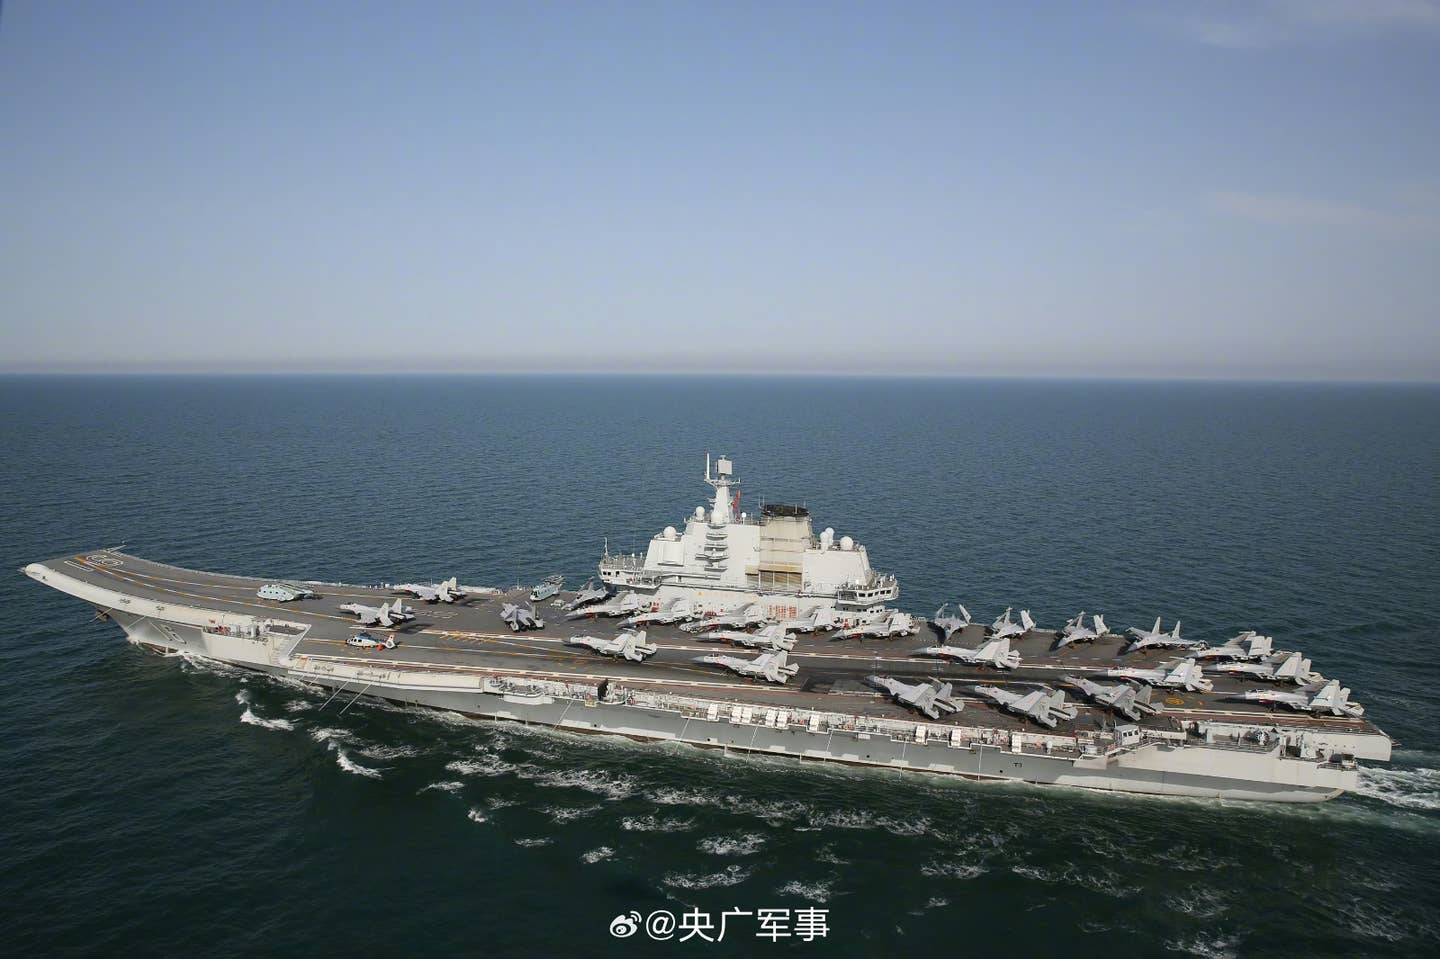 The <em>Liaoning</em> at sea with a typical air wing embarked.<em> via Chinese internet</em>